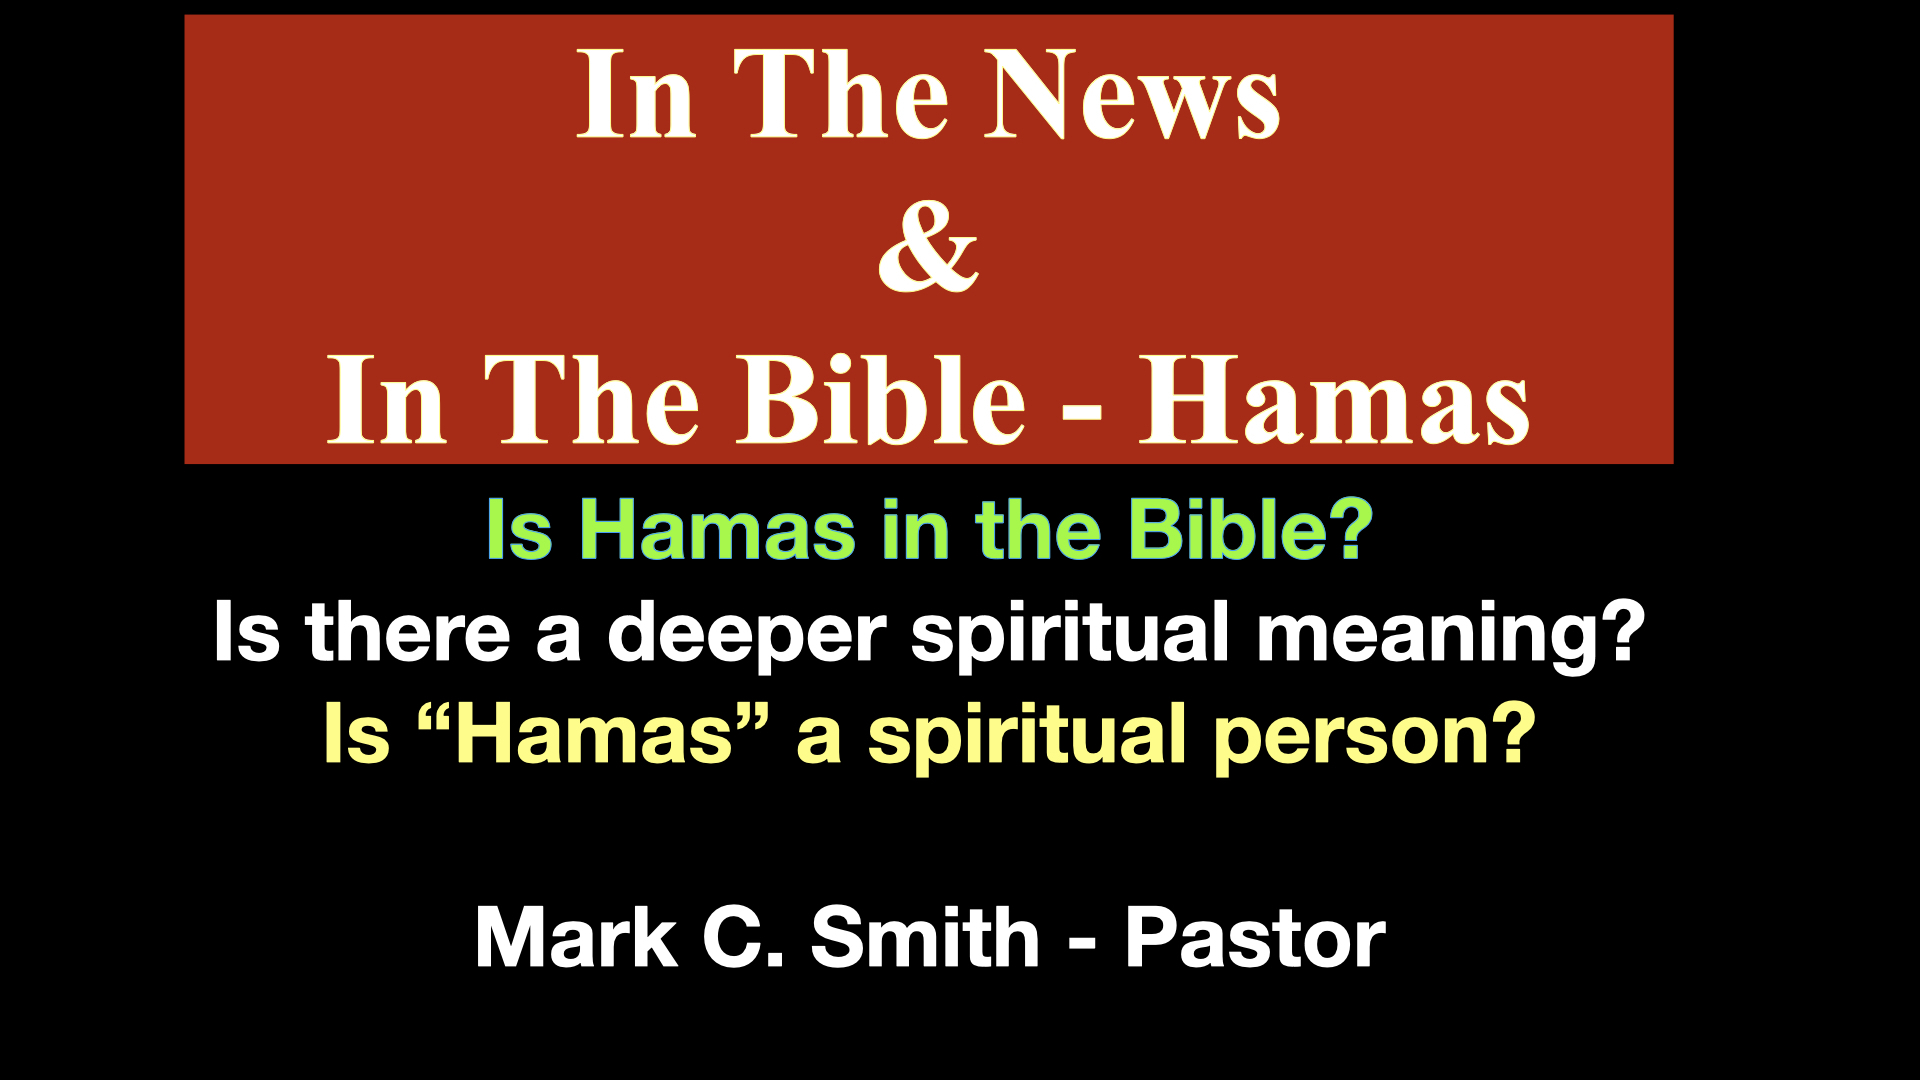 In The News and In The Bible - Hamas